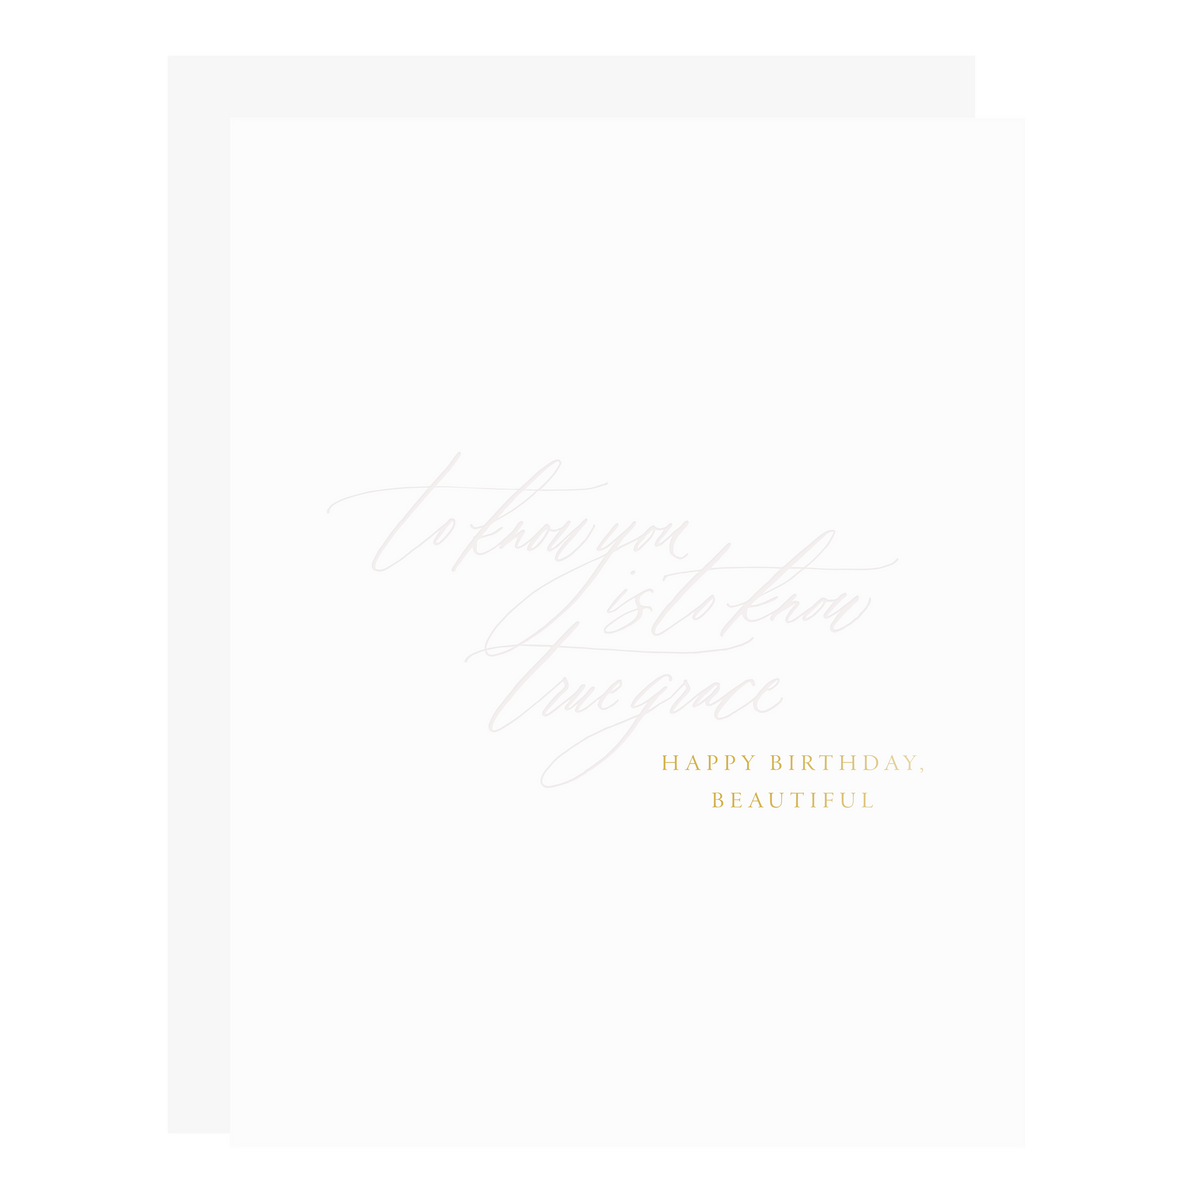 &quot;True Grace Birthday&quot; card, letterpress printed by hand in pale blush ink and gold foil.